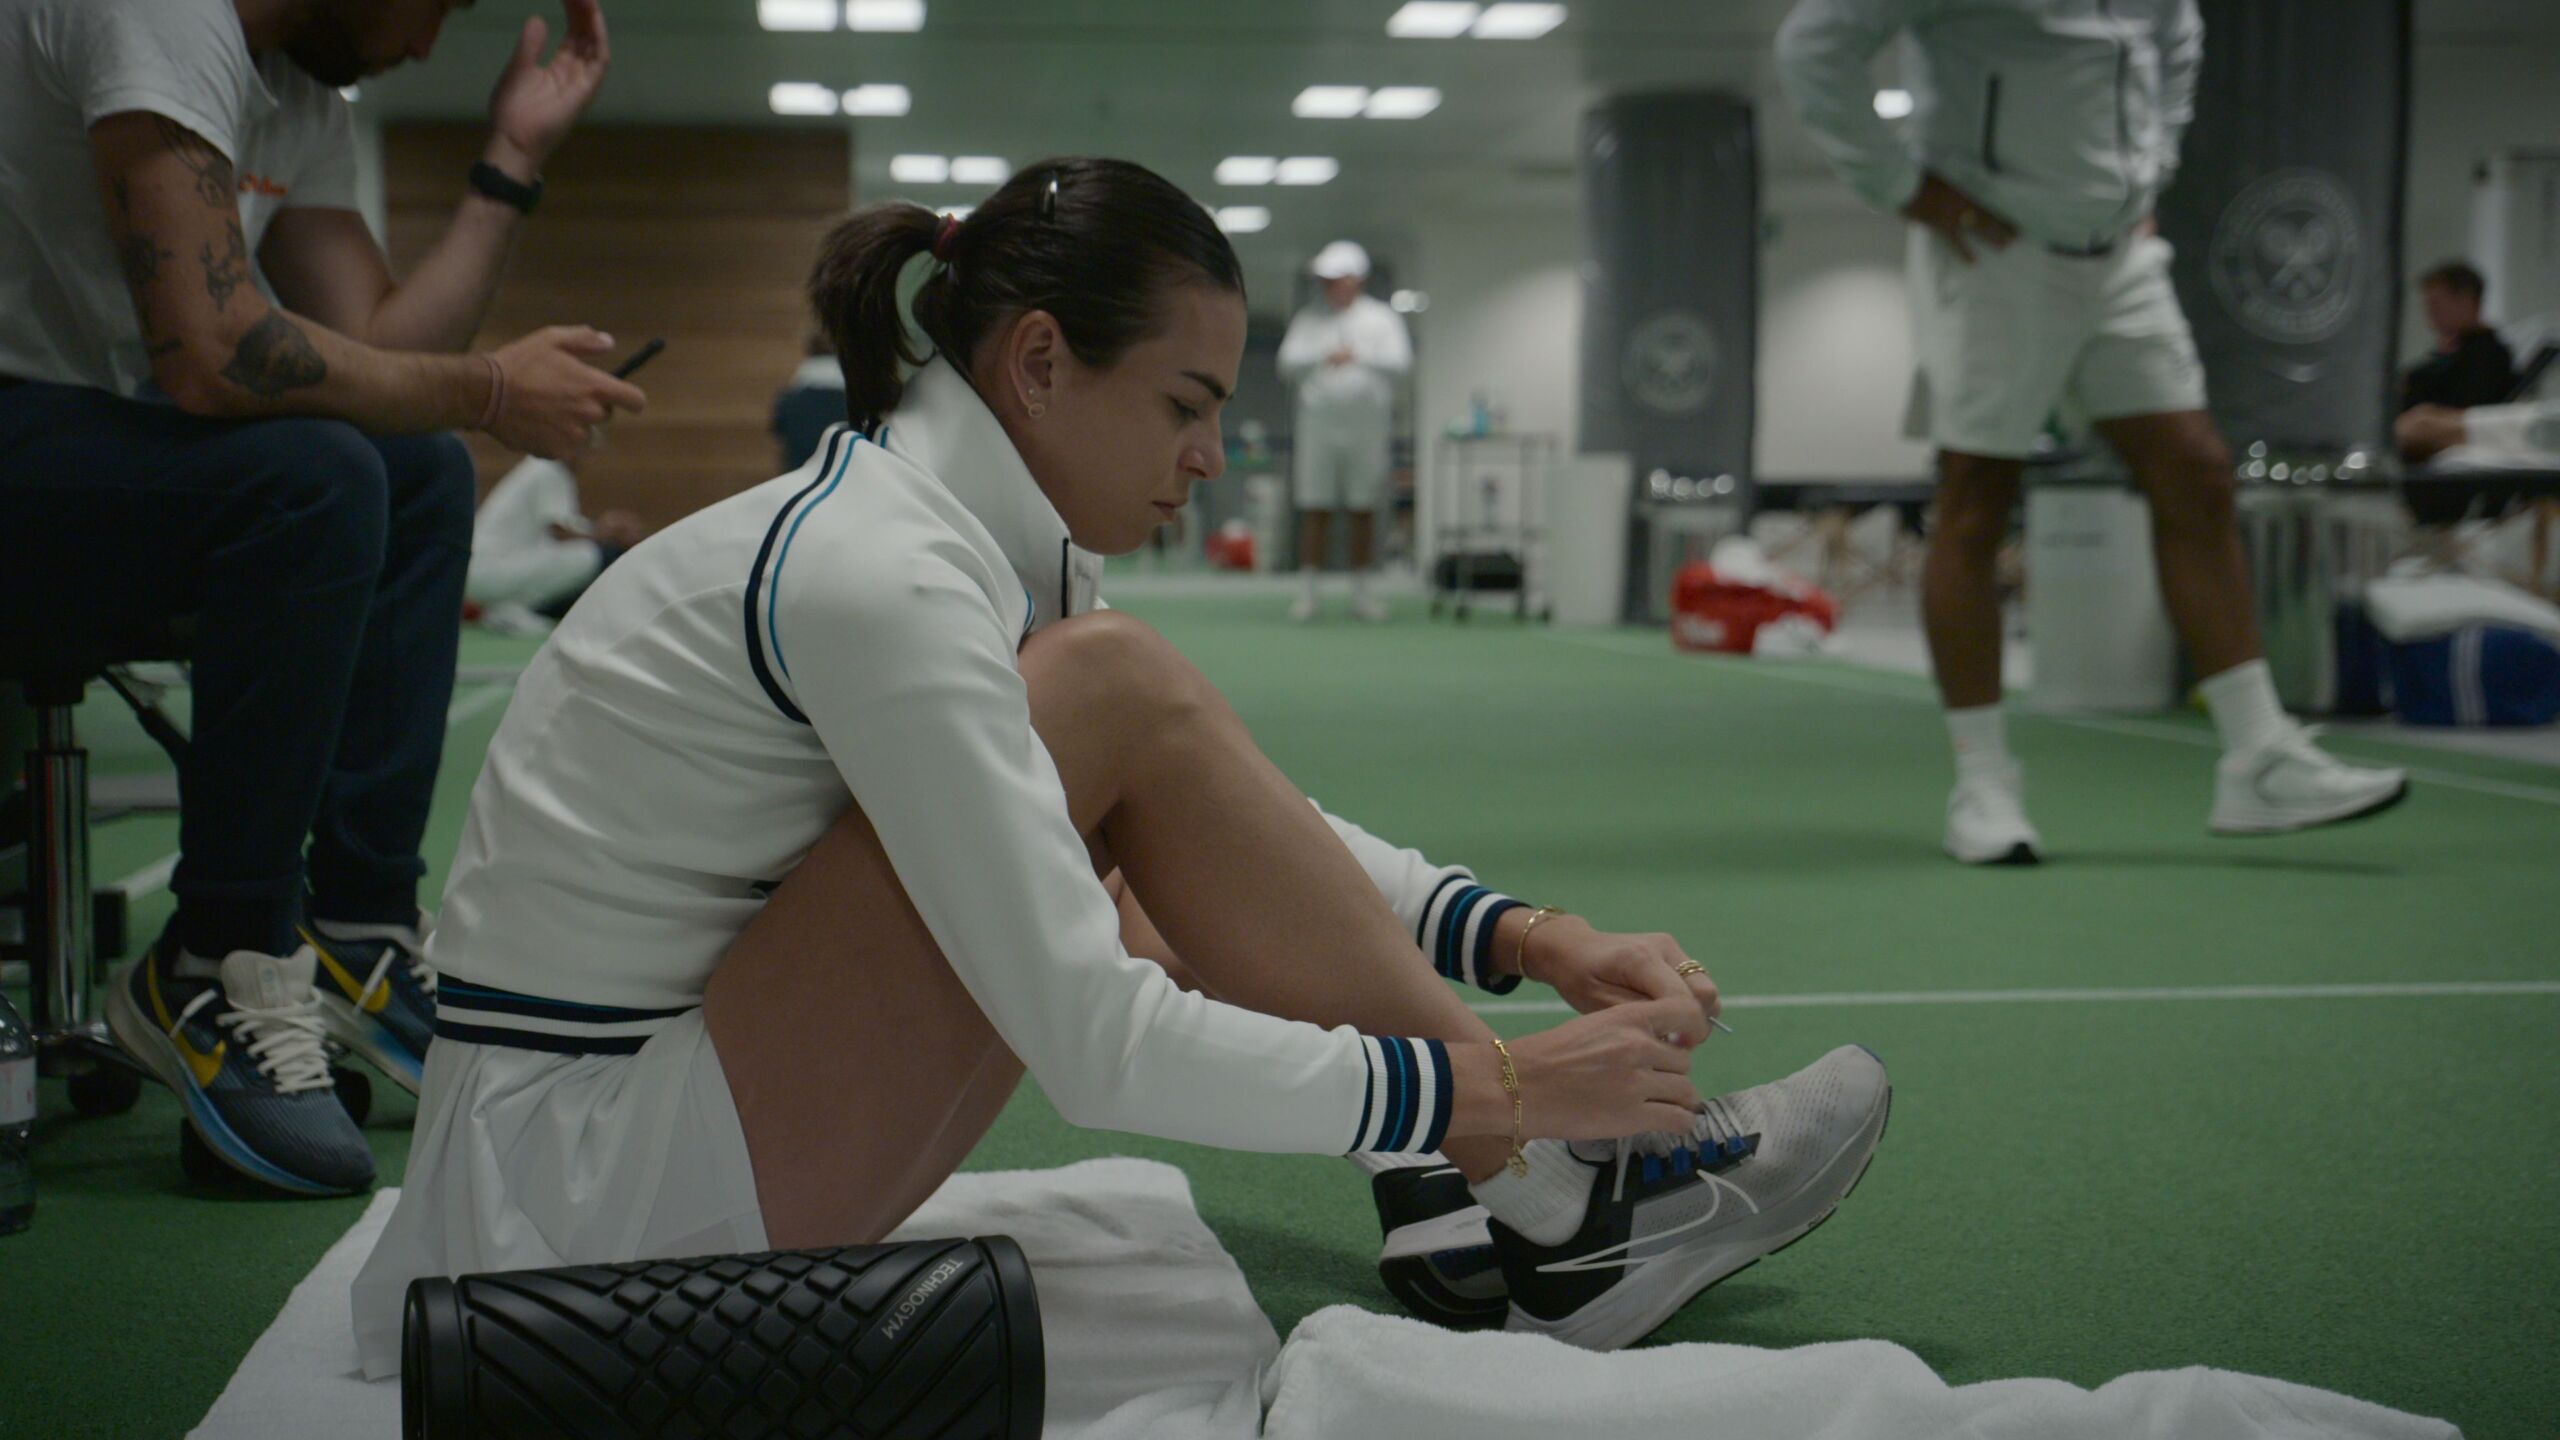 Break Point on Netflix Episode 2: The Relationship - Tennis Connected